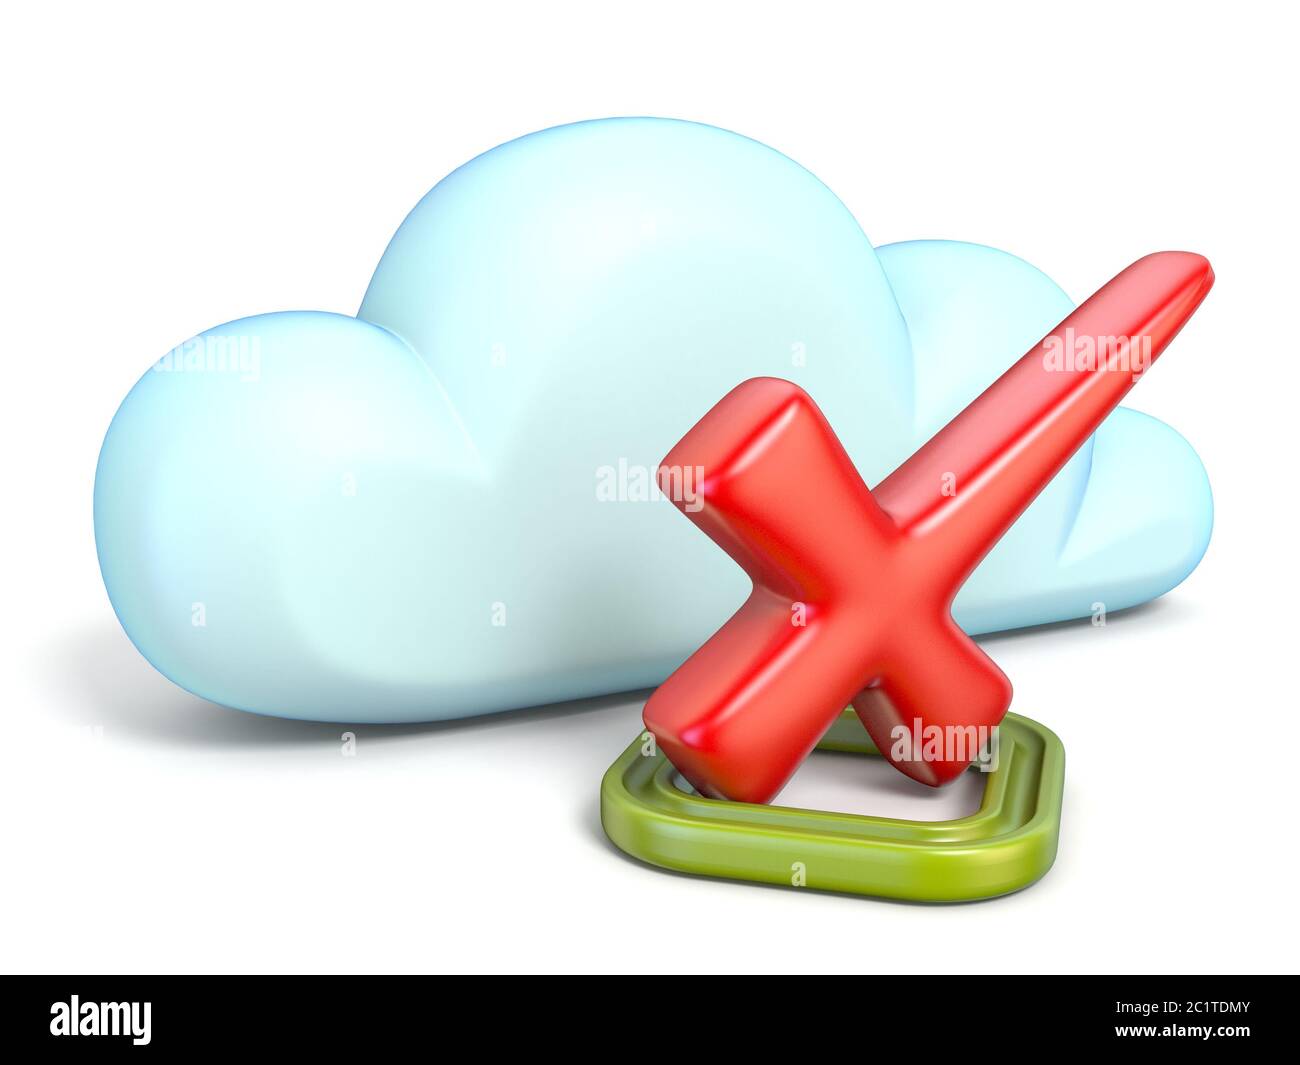 Cloud icon with red check mark 3D Stock Photo